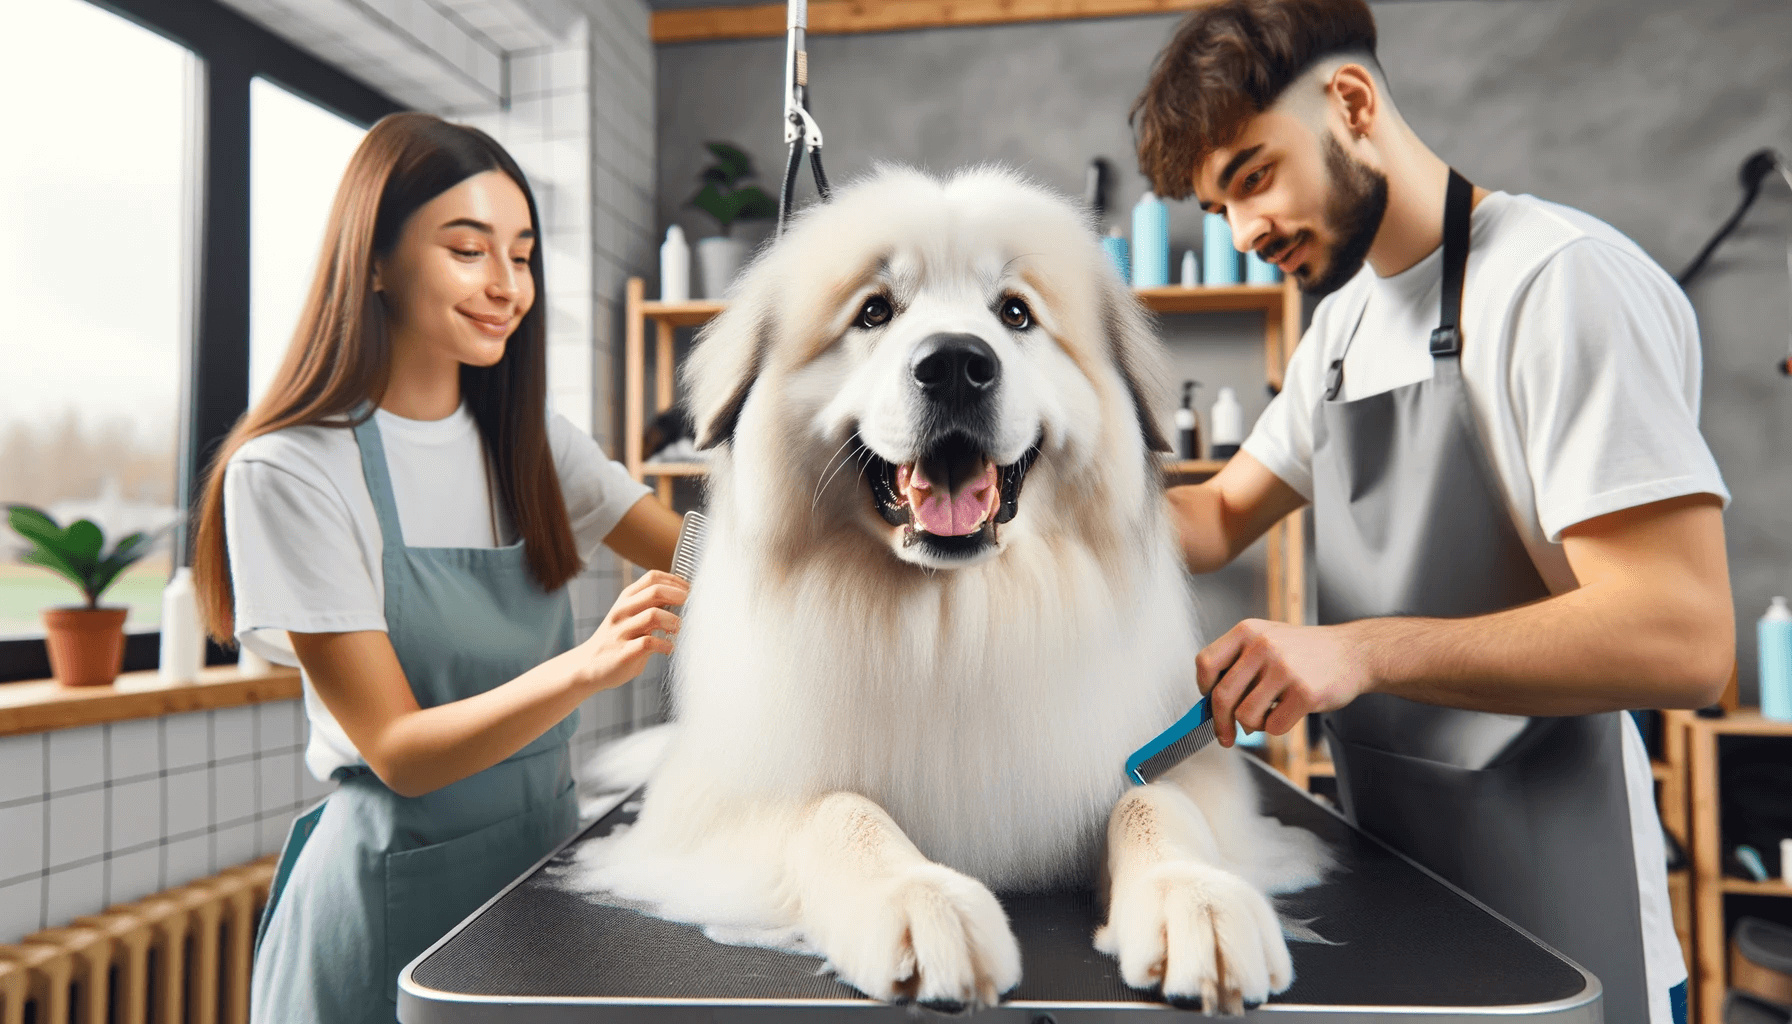 Great Pyrenees Lab Mix smiling wide during a grooming session